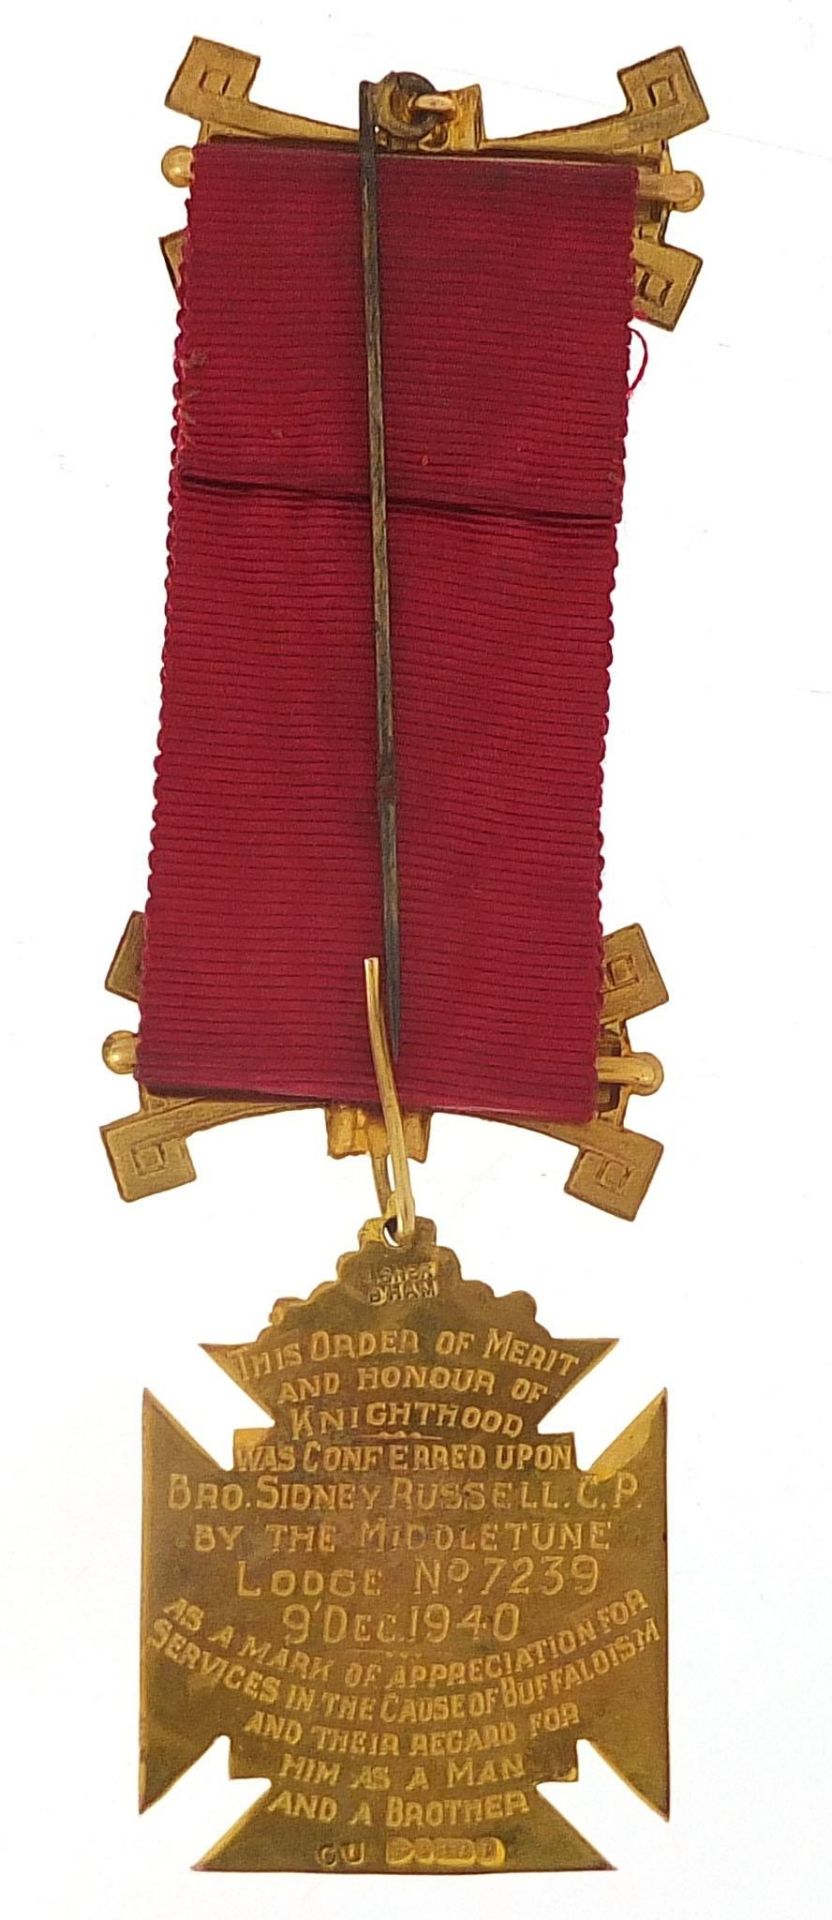 9ct gold and enamel RAOB medal with silk ribbon and bars, awarded to Bro Sidney Russell, C.P by - Image 4 of 5